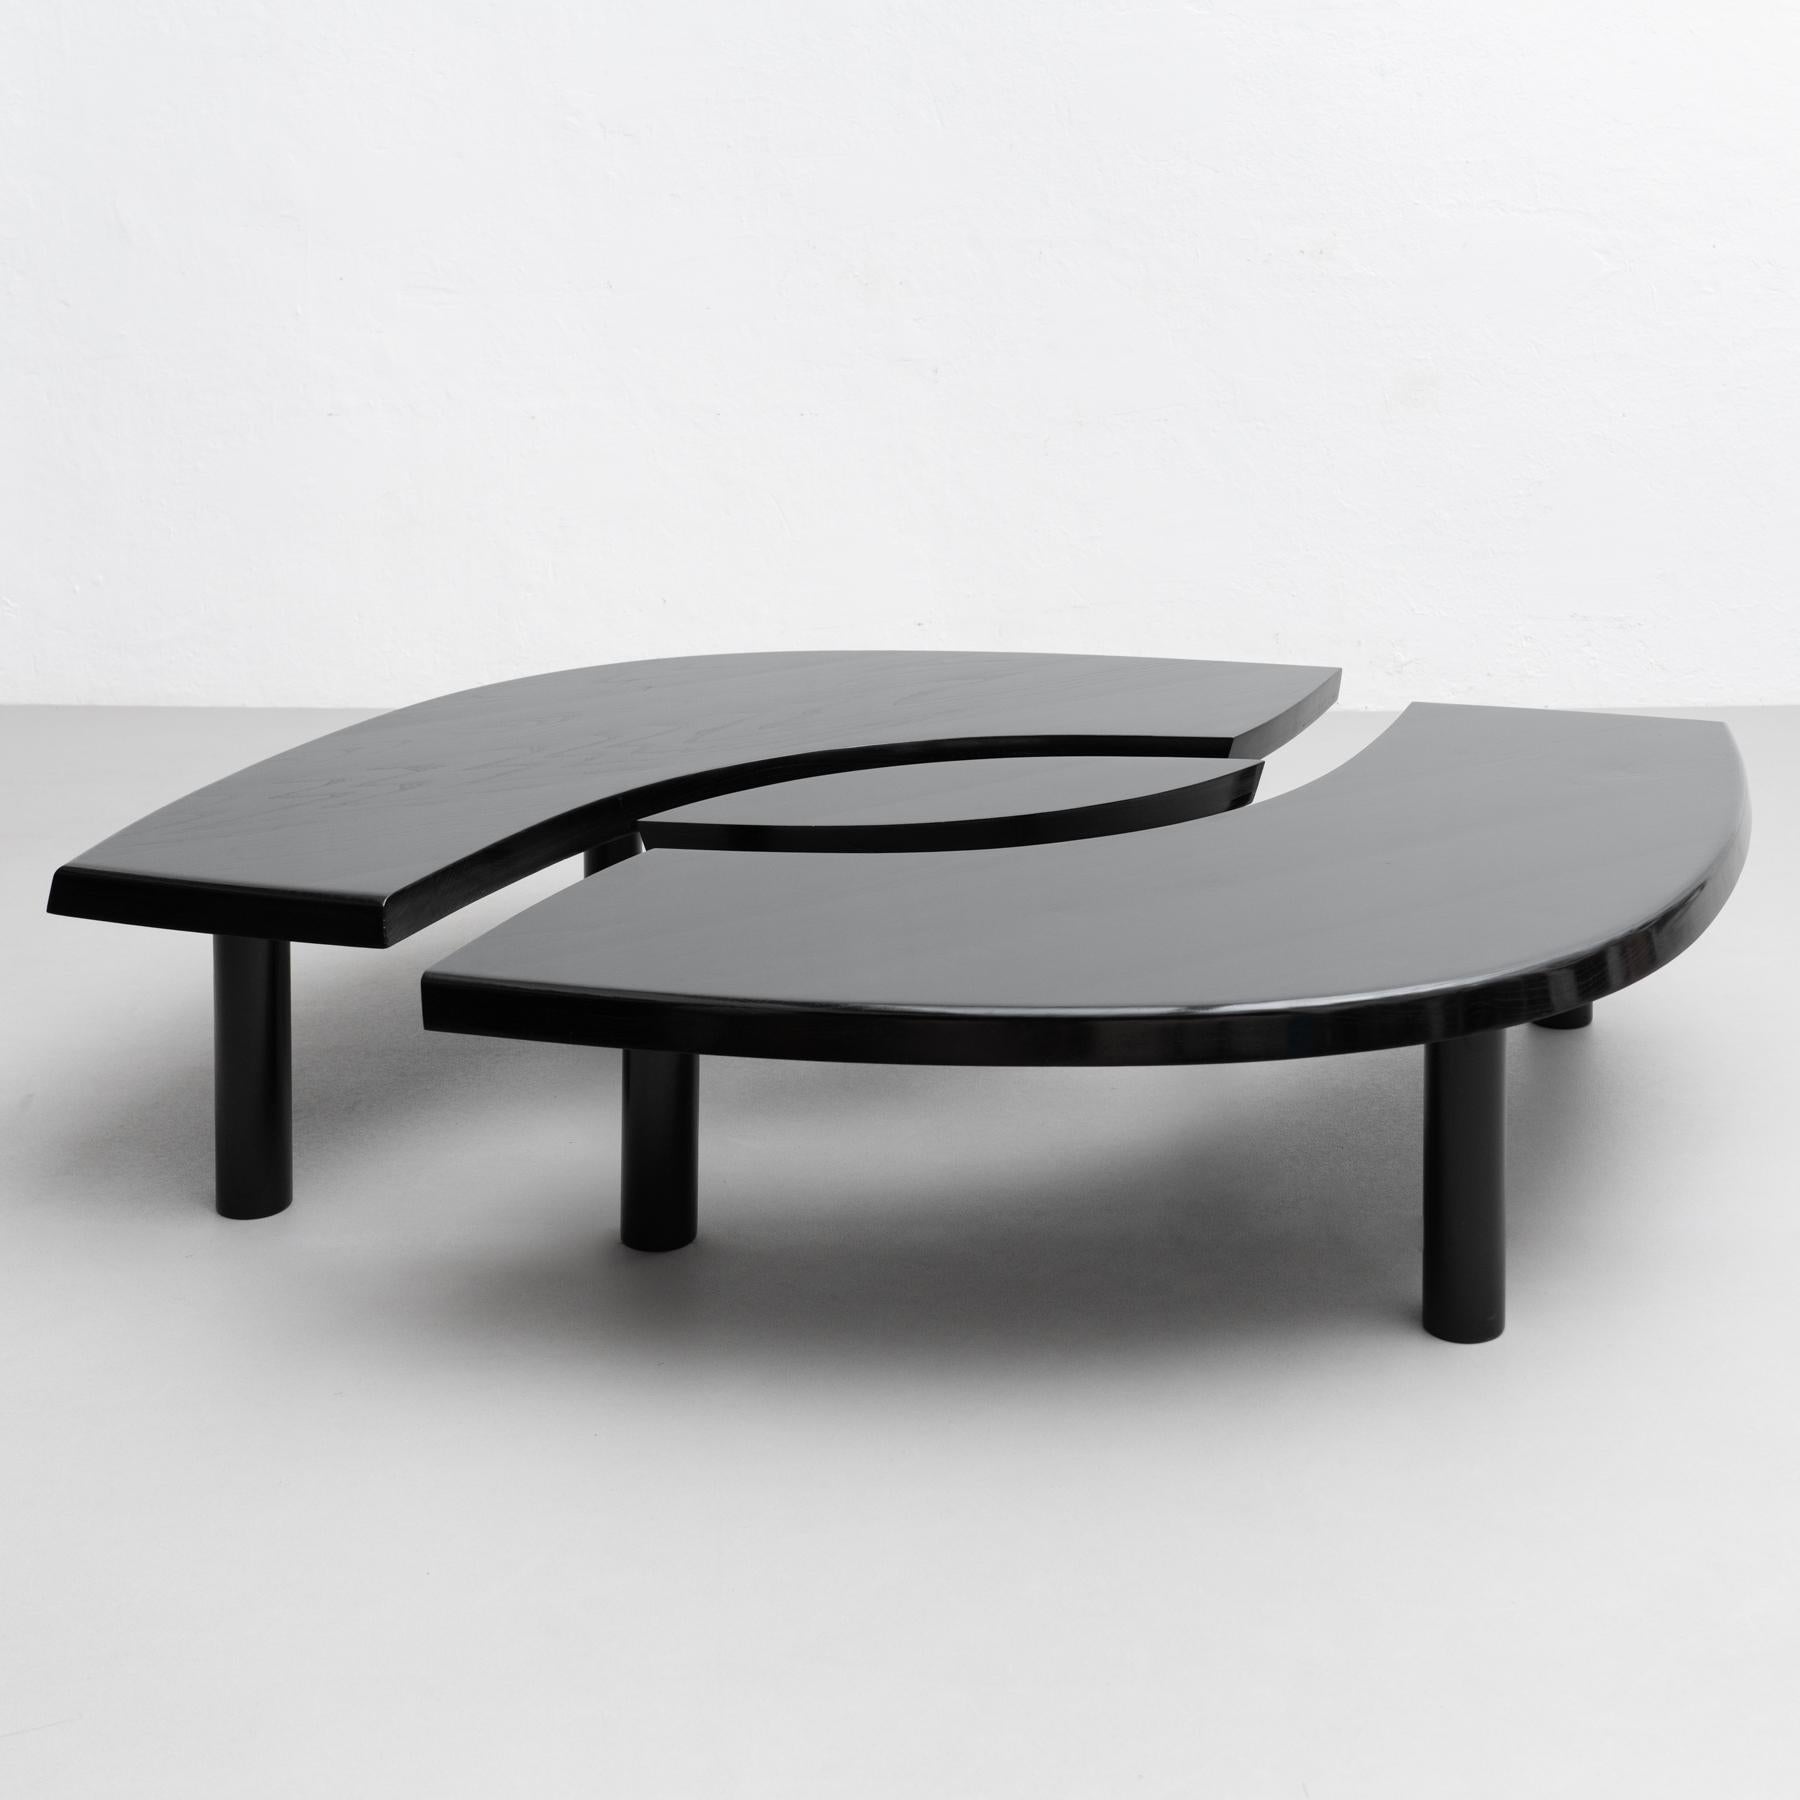 Immerse yourself in the allure of timeless design with the exclusive Black Edition of Pierre Chapo's T22 Table. Crafted in 2021 by Chapo Creation, this iconic piece pays homage to the original design dating back to 1970 in France. The table's